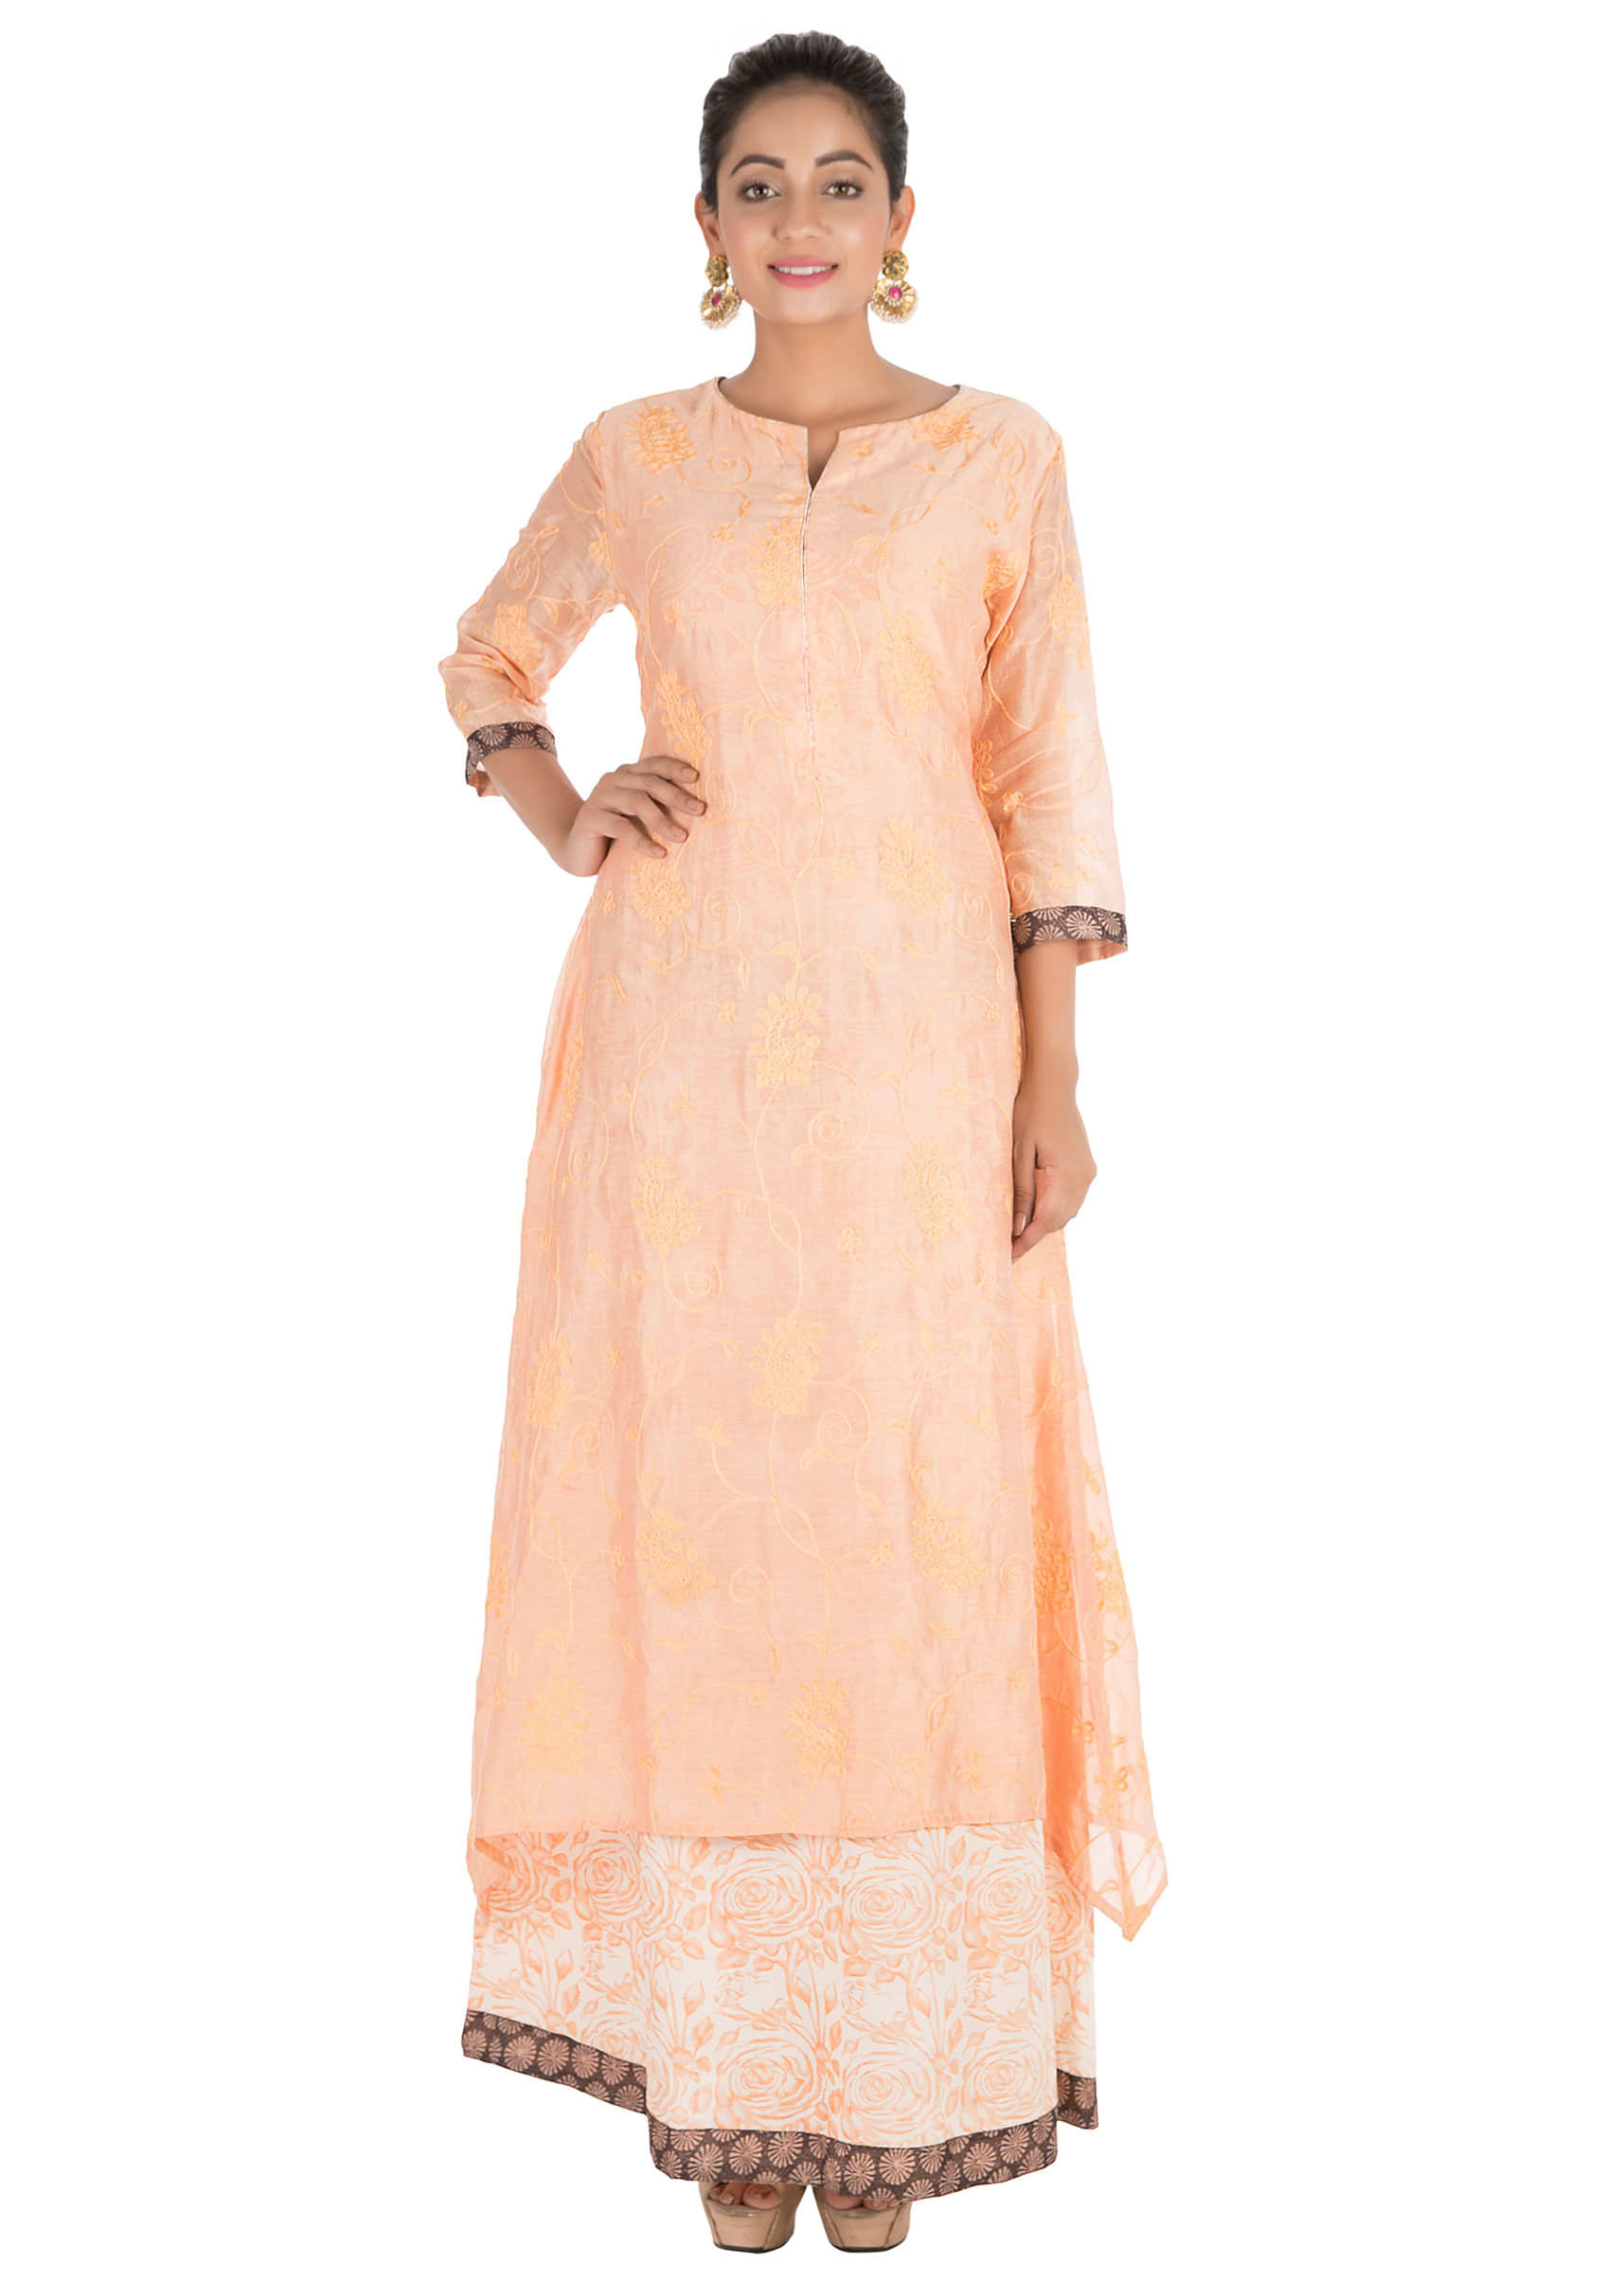 Hand Printed & Embroidered  Pale Orange Double Layer Kurti